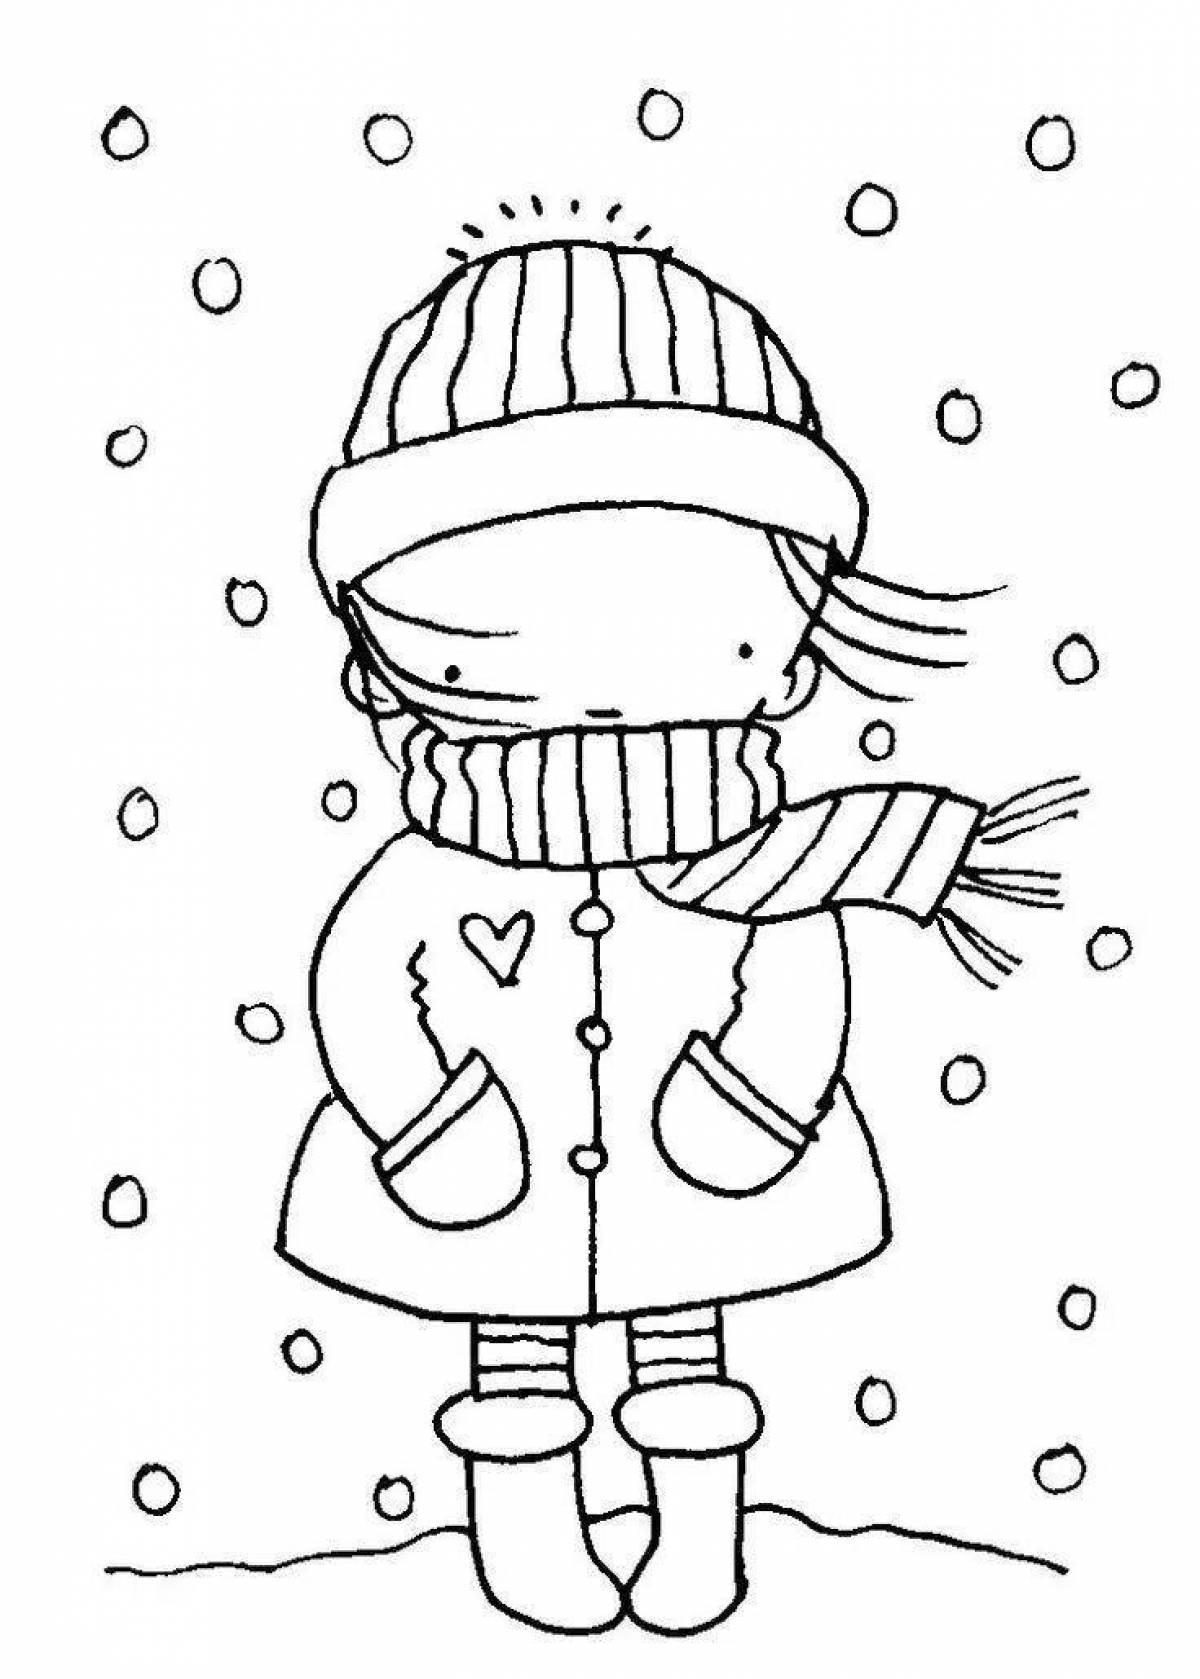 Elegant coloring book for children boy in winter clothes